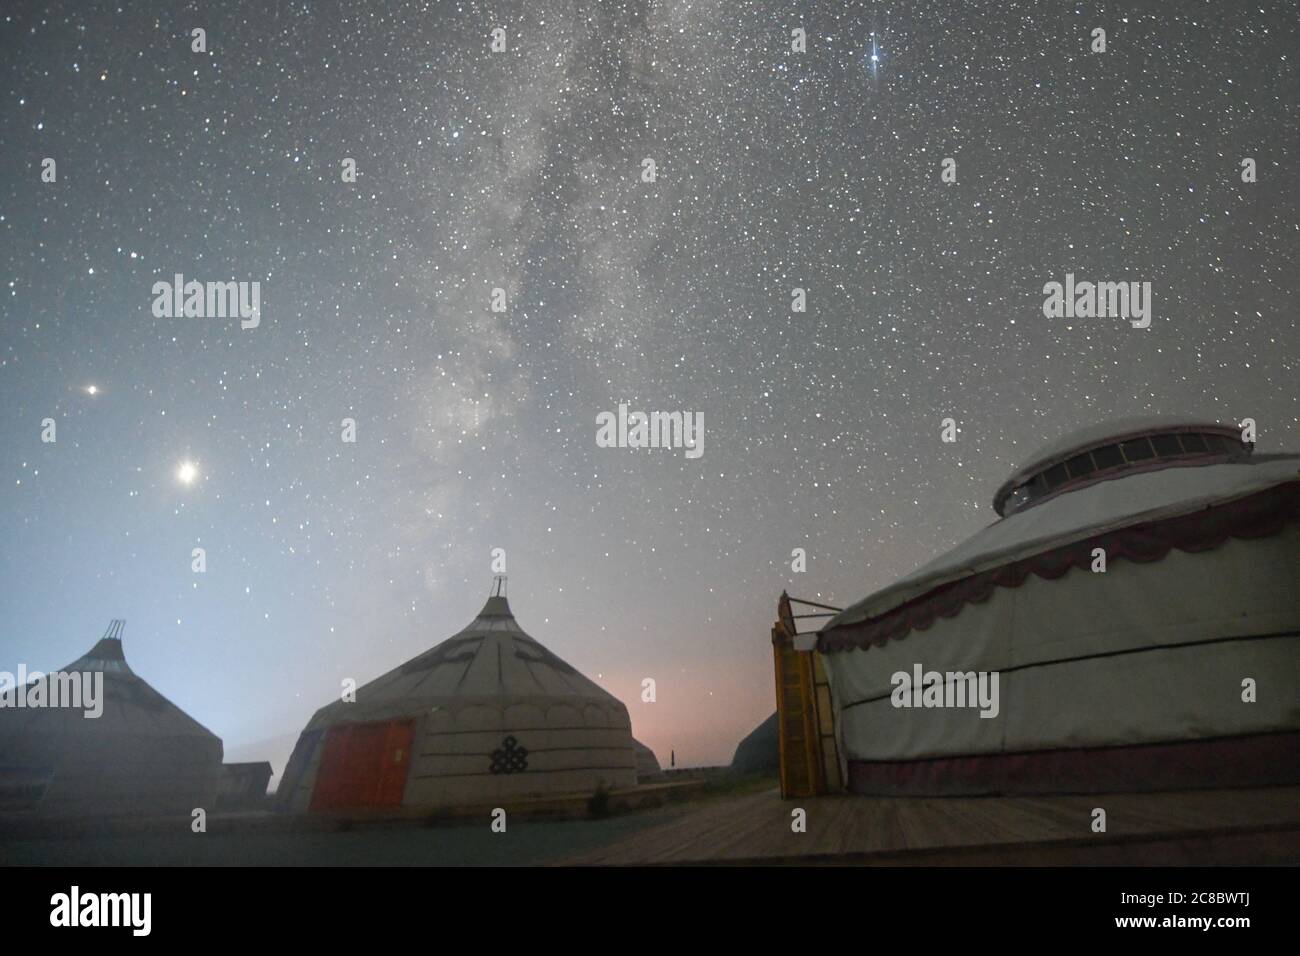 (200723) -- ZHENGLAN BANNER, July 23, 2020 (Xinhua) -- Photo taken on July 23, 2020 shows Mongolian yurts near the site of Xanadu under the starry sky in Zhenglan Banner of Xilingol League, north China's Inner Mongolia Autonomous Region. Located in Zhenglan Banner of Xilingol League, north China's Inner Mongolia Autonomous Region, the relic site of Xanadu, or Yuan Shangdu ruins, is one of the best preserved sites of the capital cities of Yuan Dynasty (1271-1368) in China. Credit: Xinhua/Alamy Live News Stock Photo